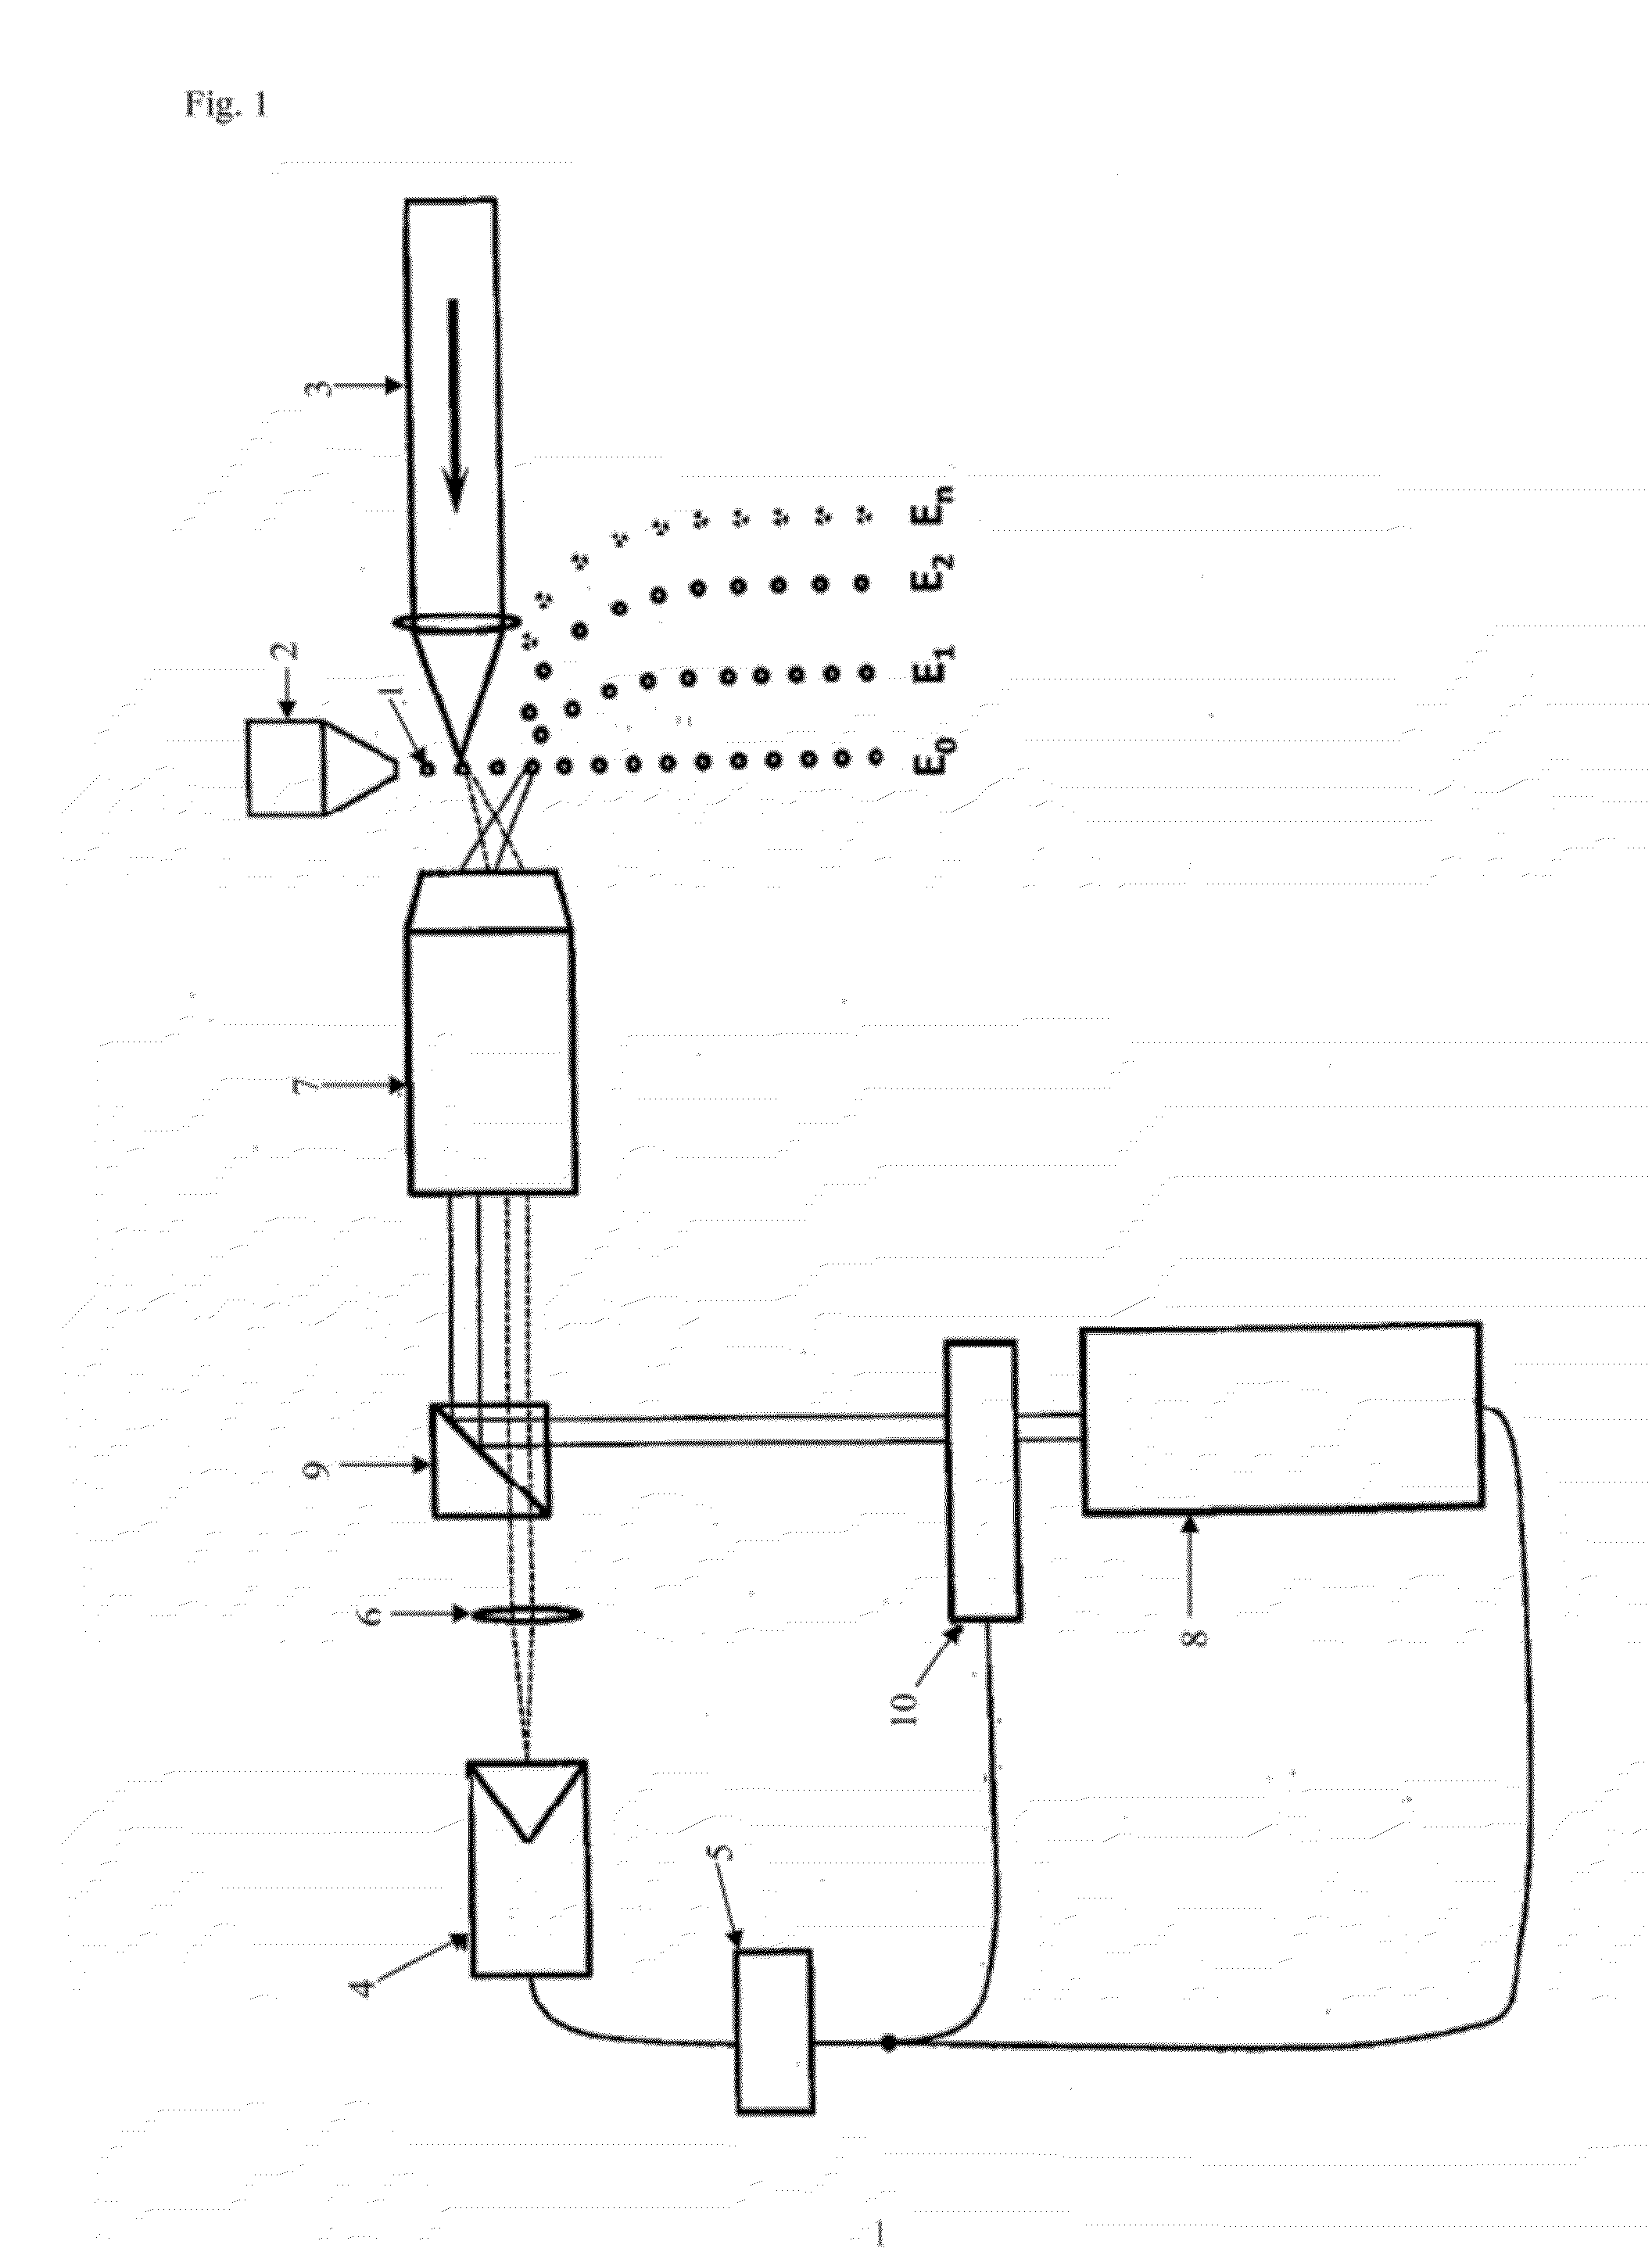 Apparatus and method for selecting particles